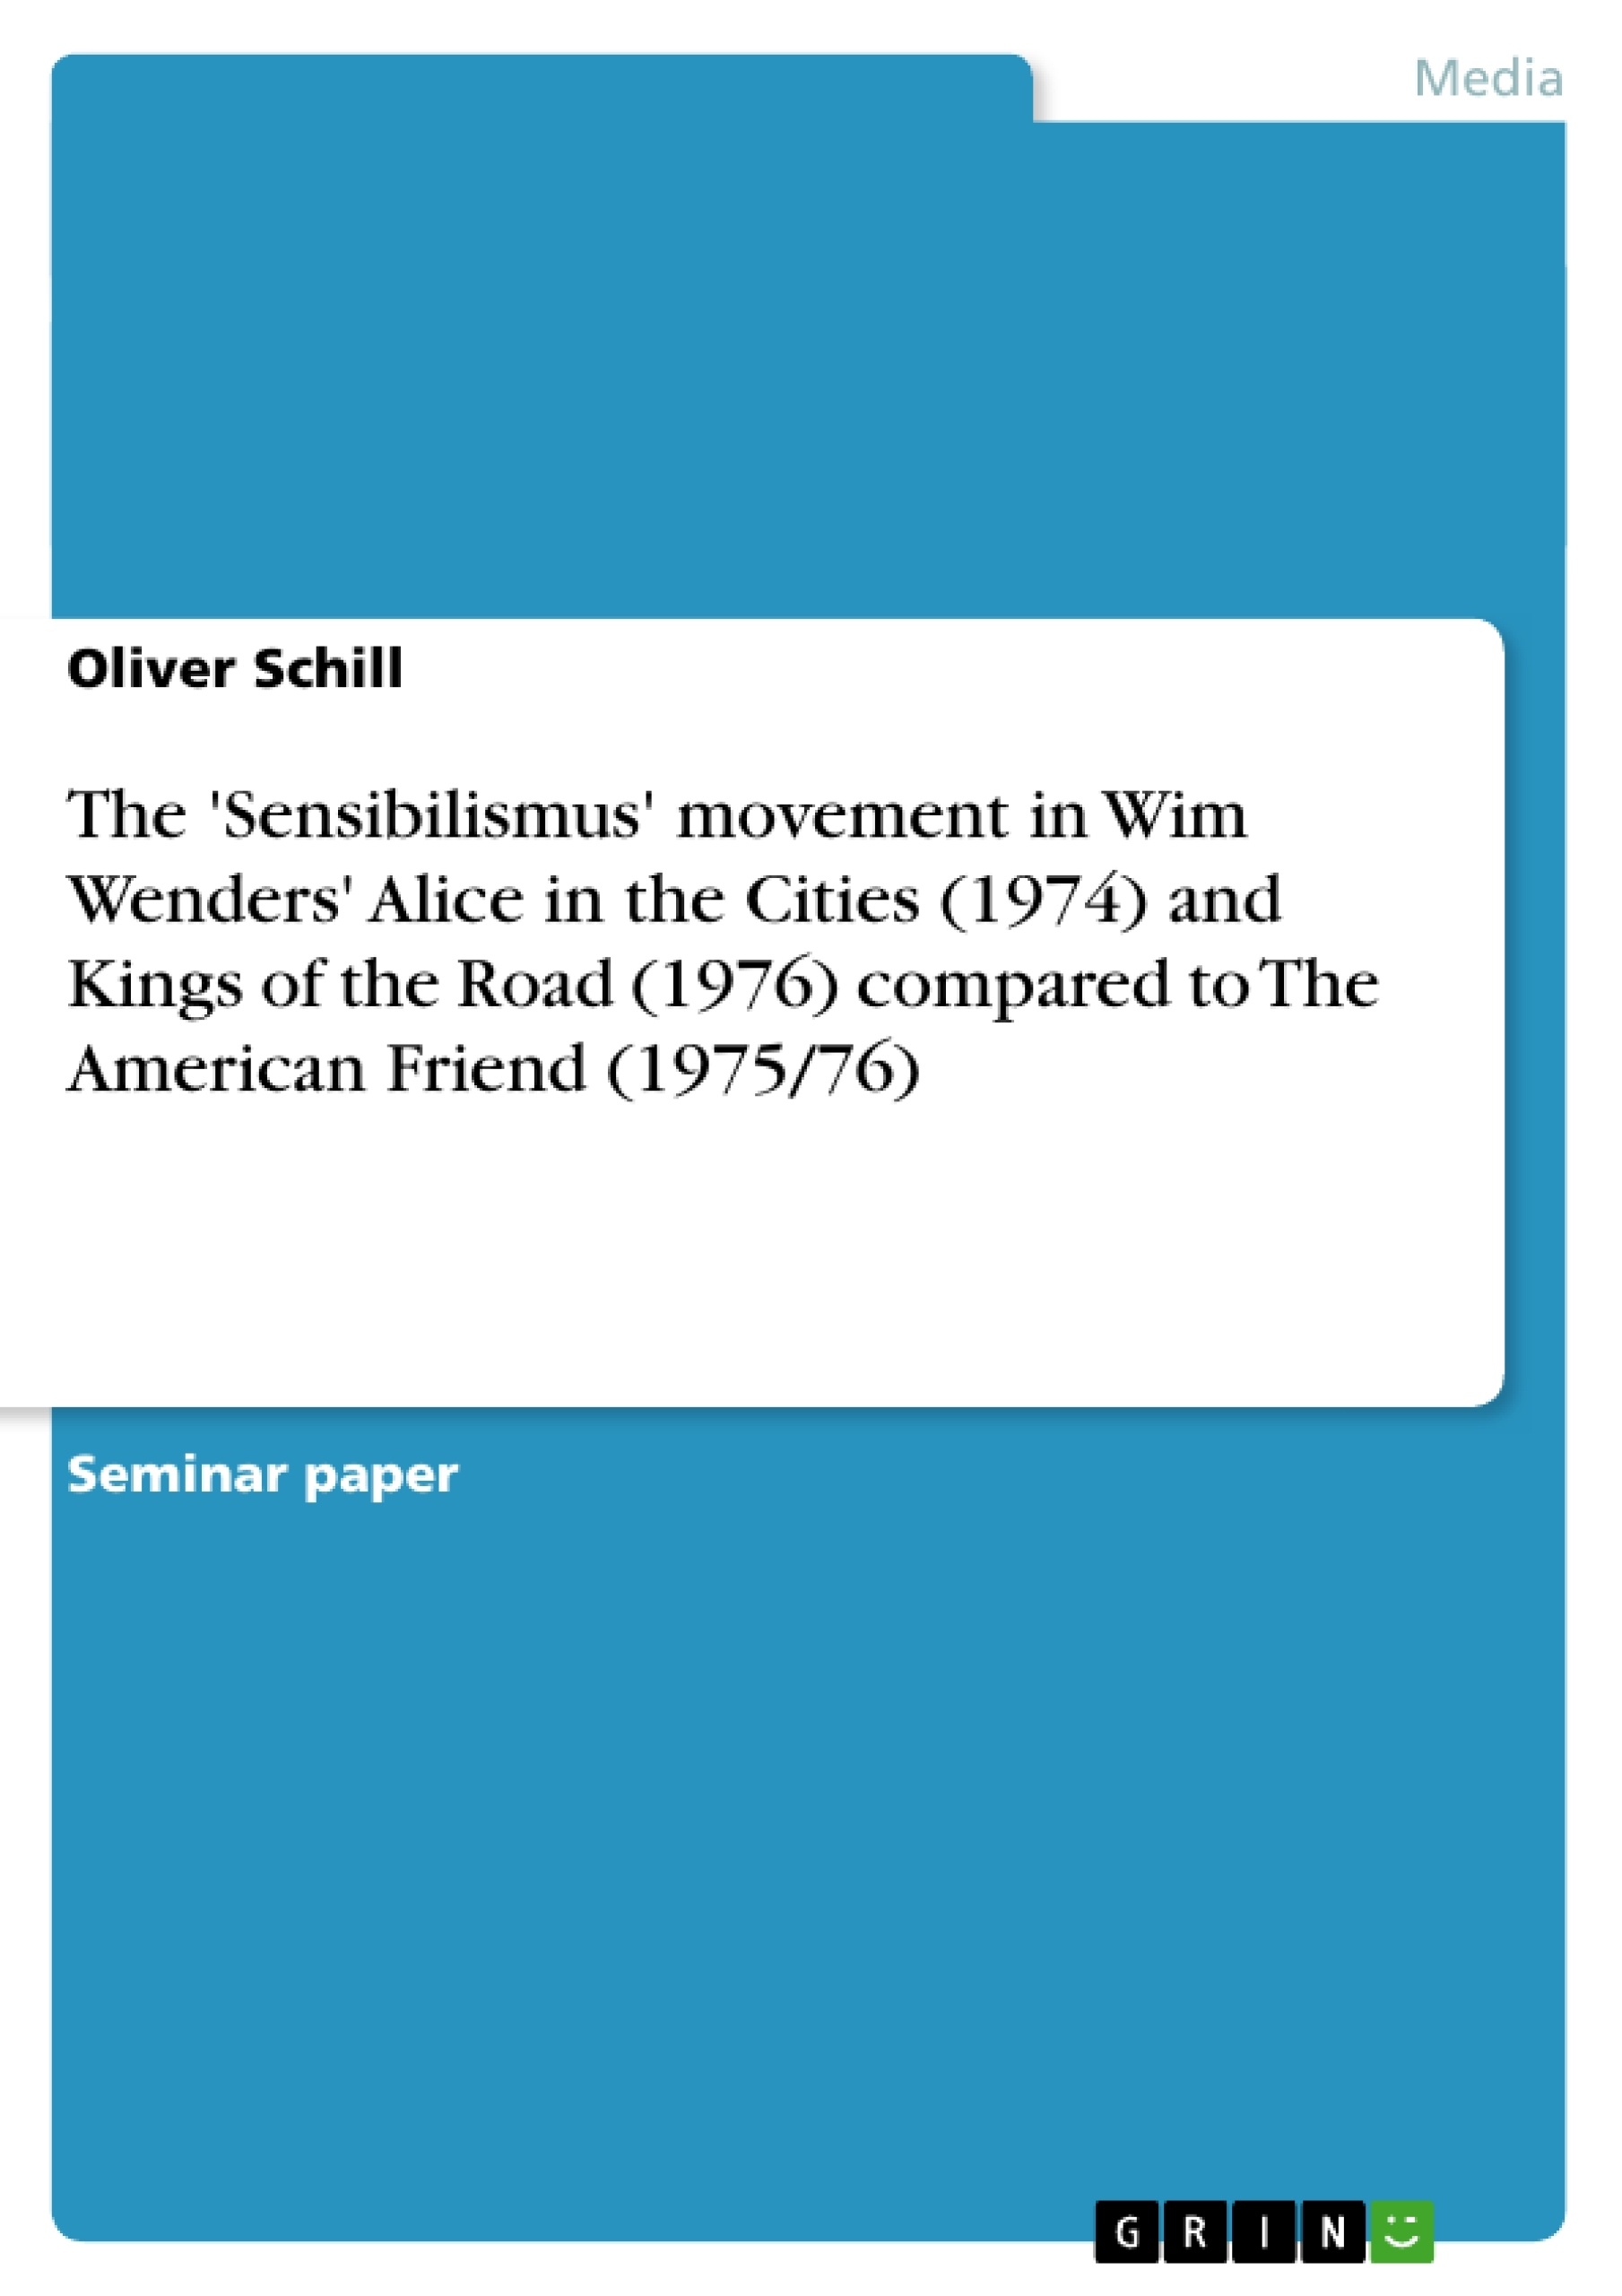 Título: The 'Sensibilismus' movement in Wim Wenders' Alice in the Cities (1974) and Kings of the Road (1976) compared to The American Friend (1975/76)